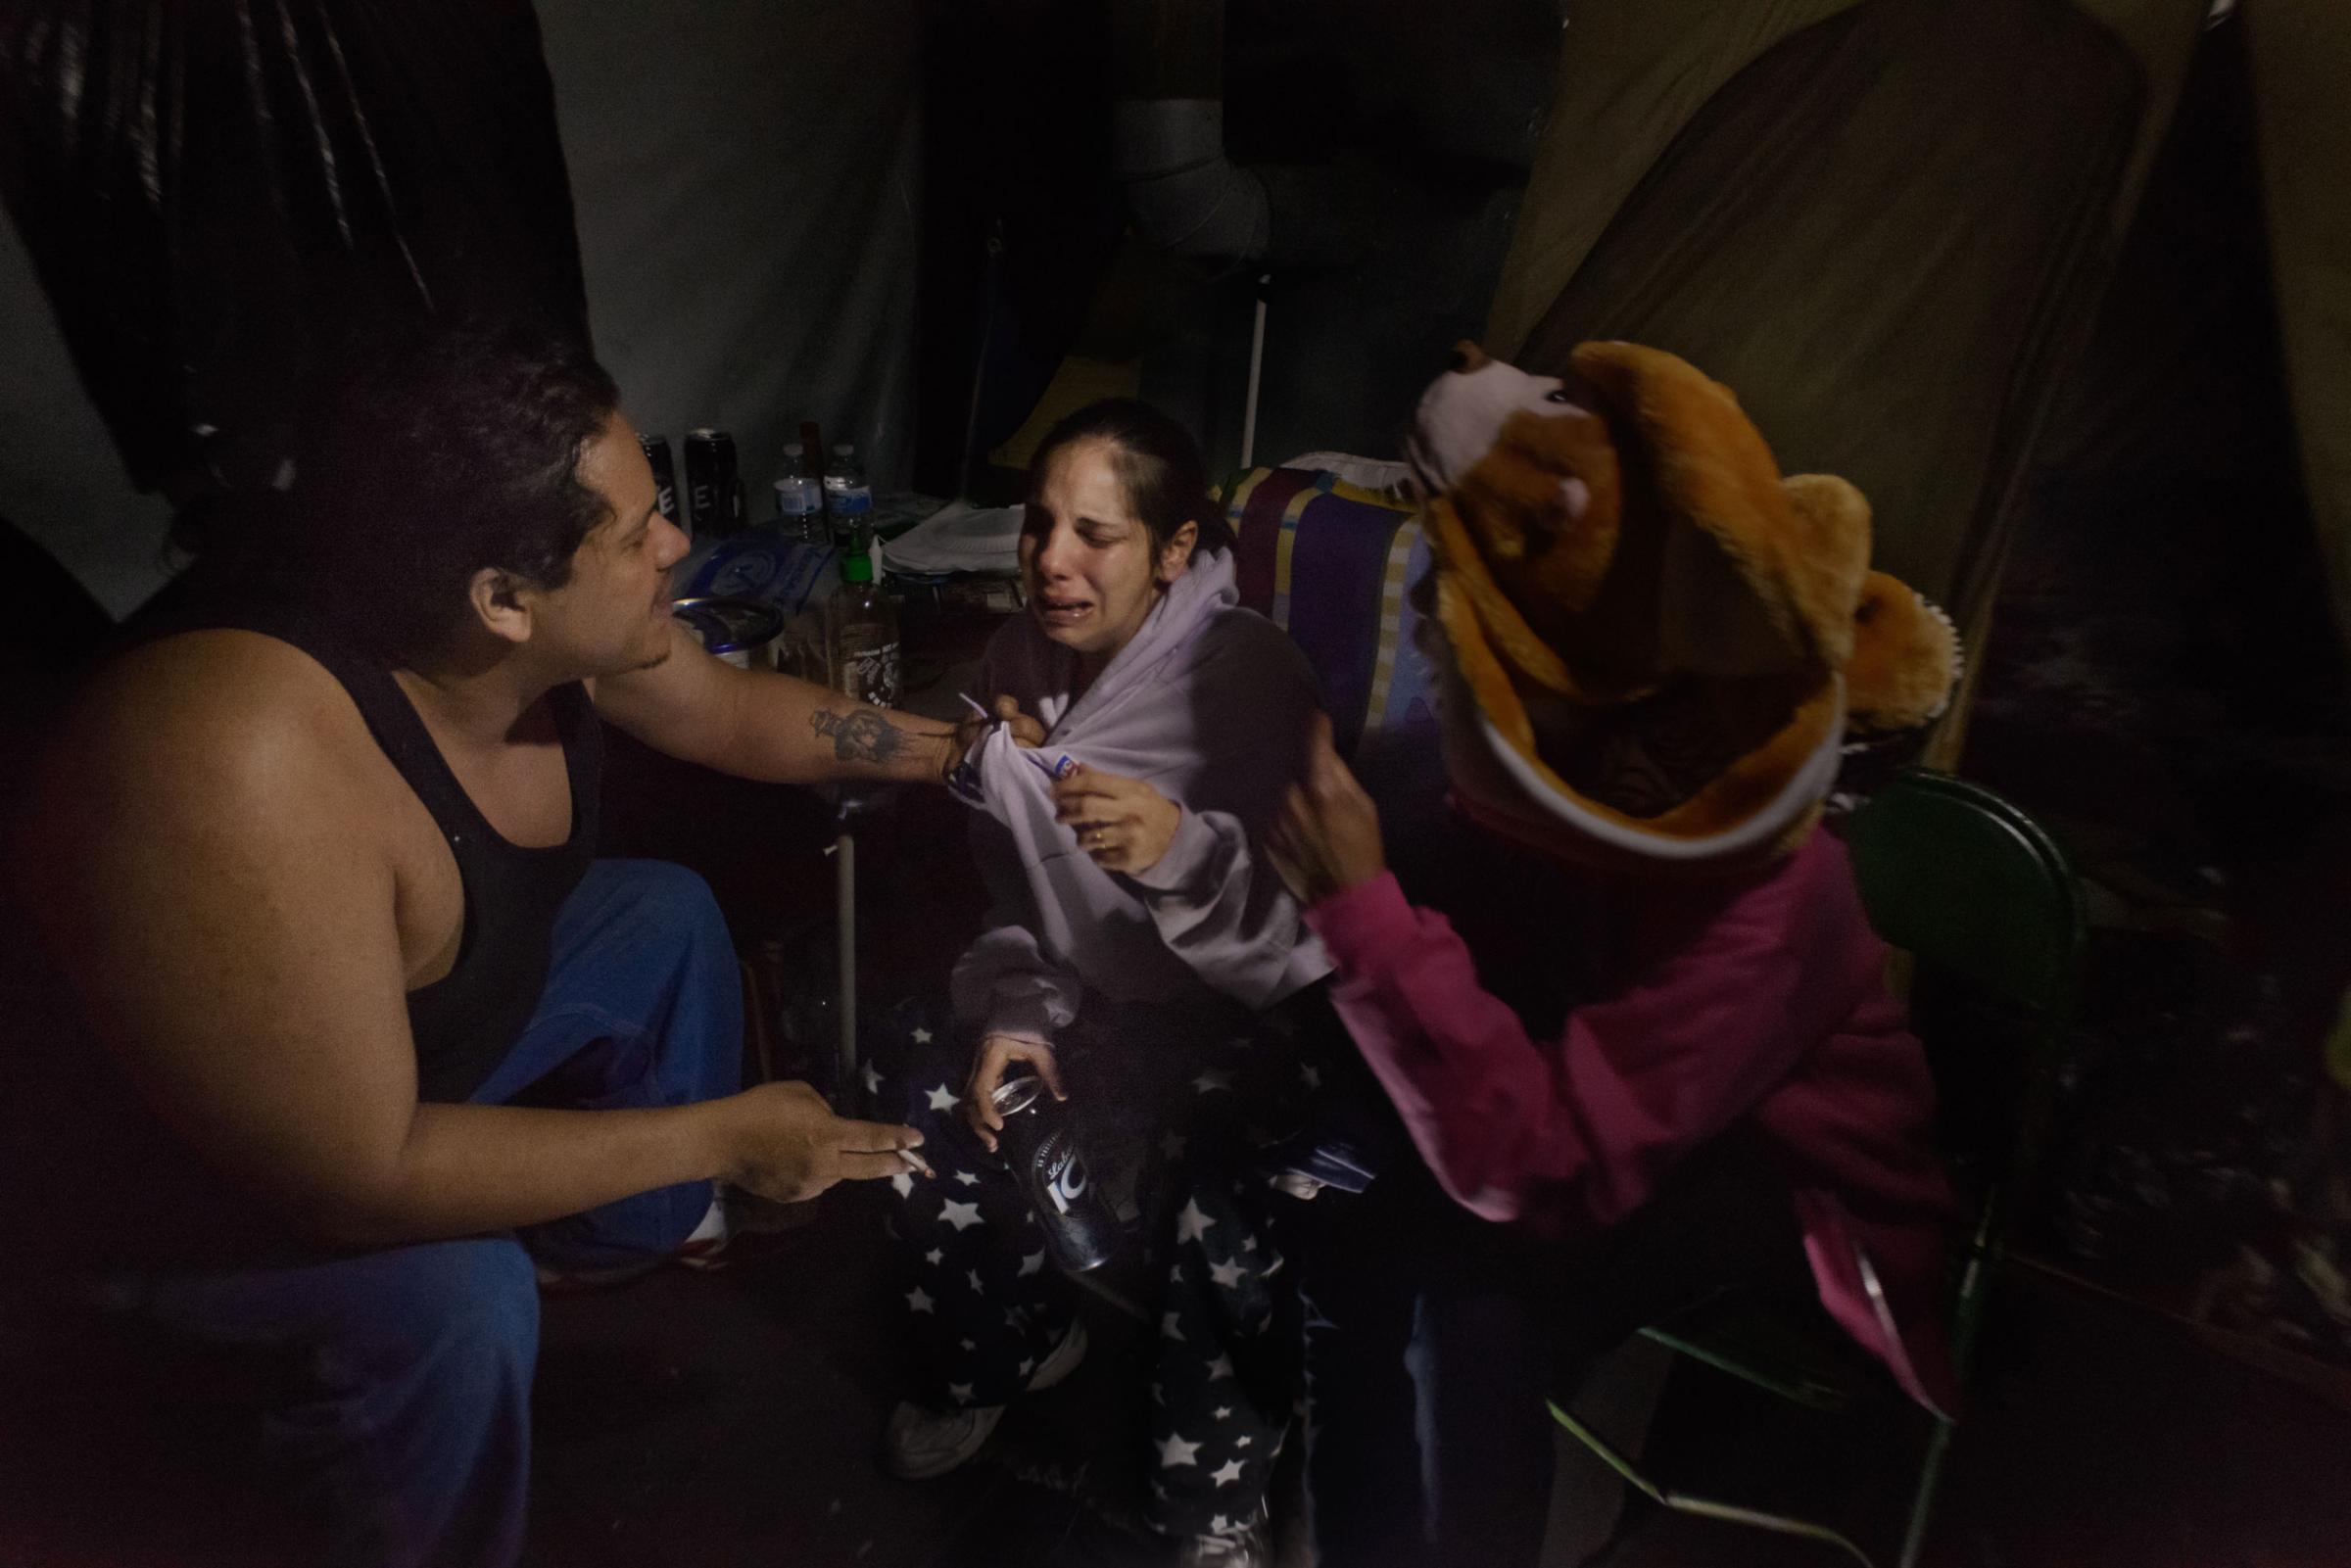 16  March  2014 - Tent City, Lakewood, New Jersey - Andrew is upset his pregenat fiance' Samantha is talking about her ex-husband and her 5 children who had been taken away by social services. Eve takes Andrew's side, believing it is disrectful to her man to talk about past relationships. .